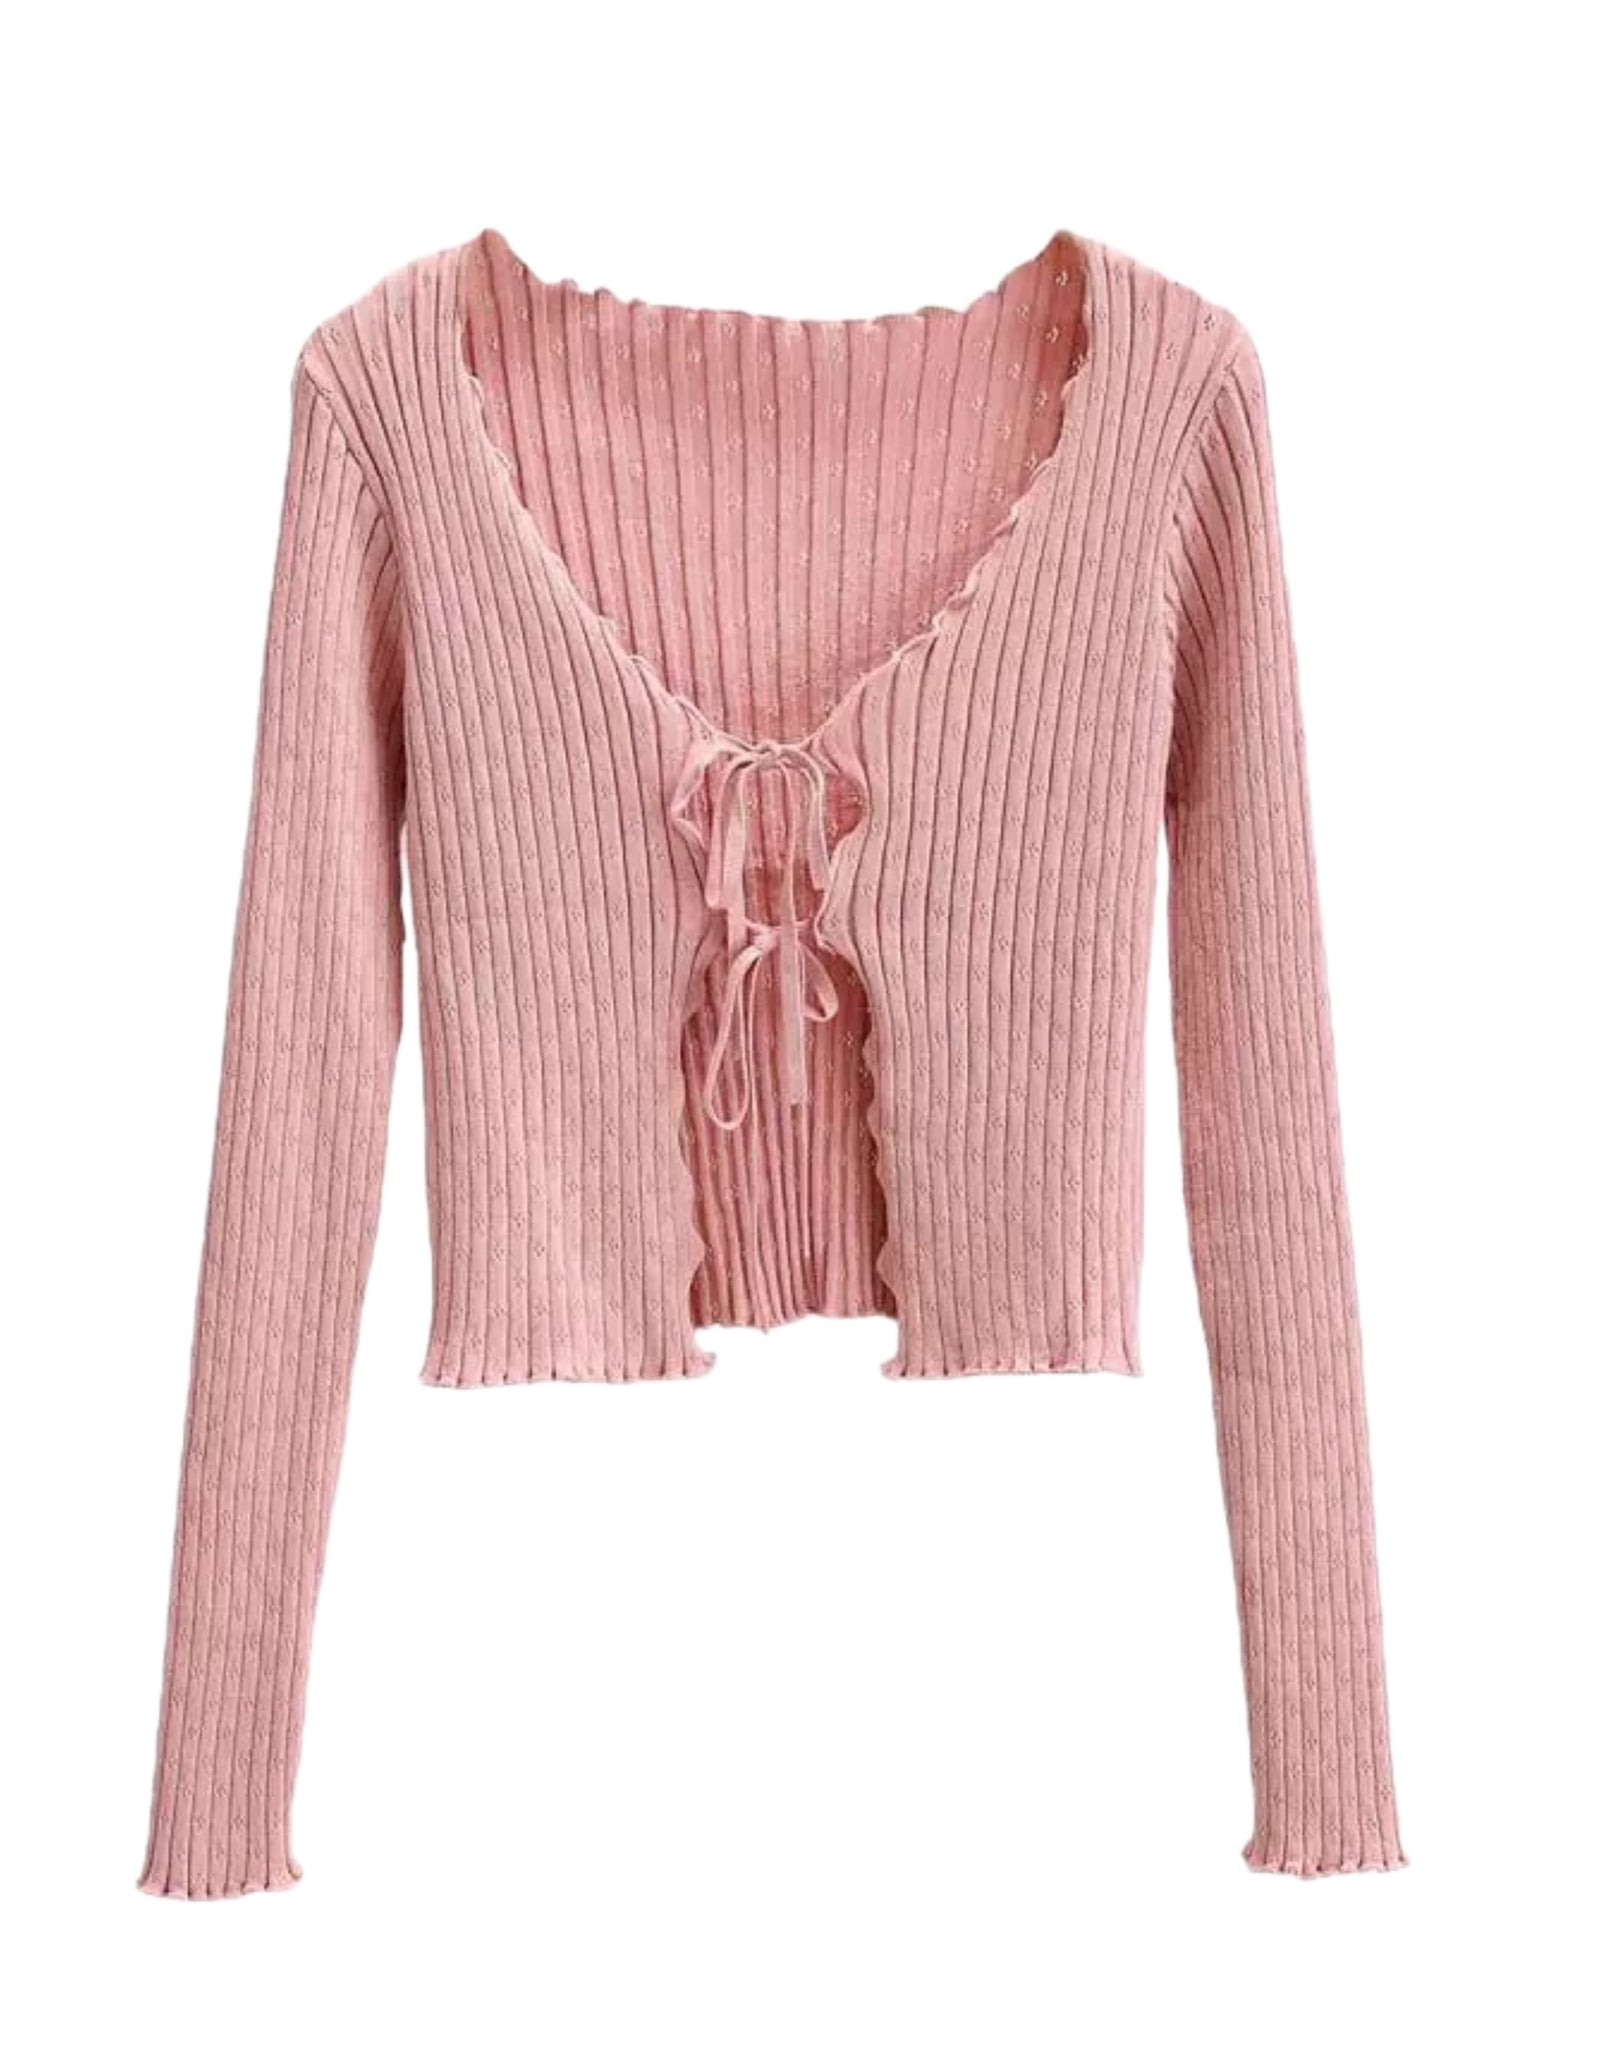 Tied Up Pointelle Cardigan Top